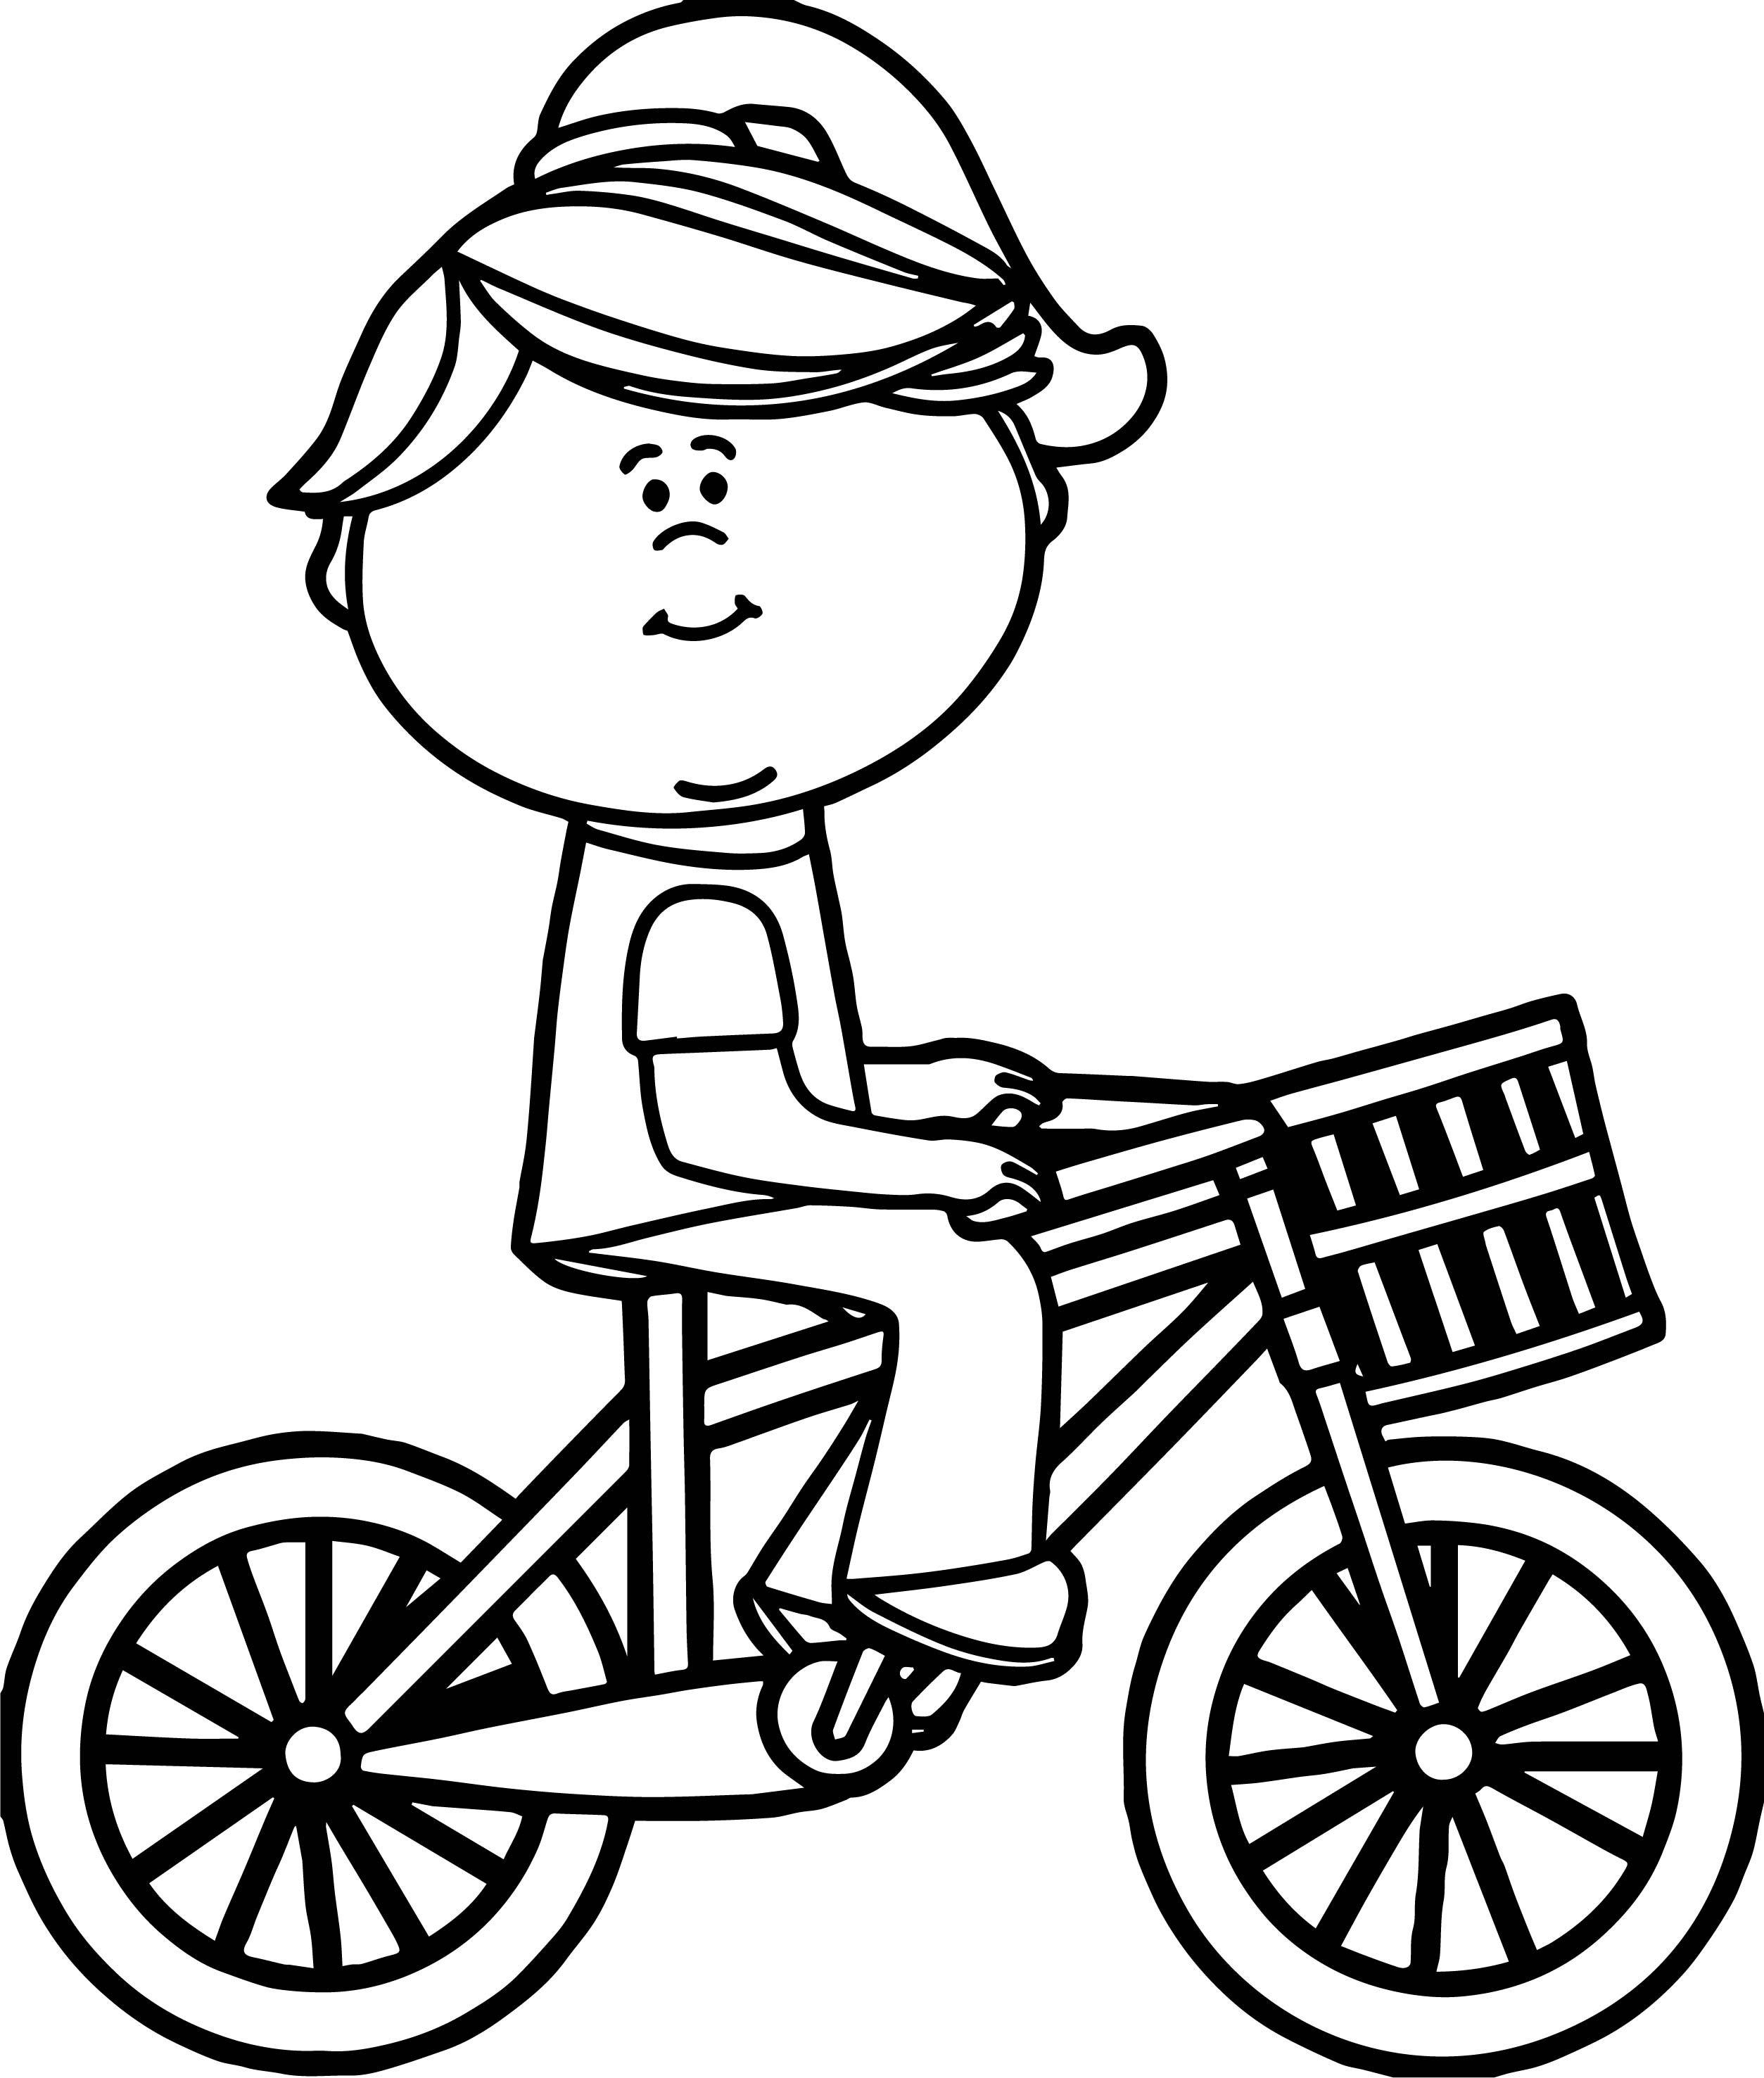 Bike Riding Coloring Pages At Getcolorings.com | Free Printable